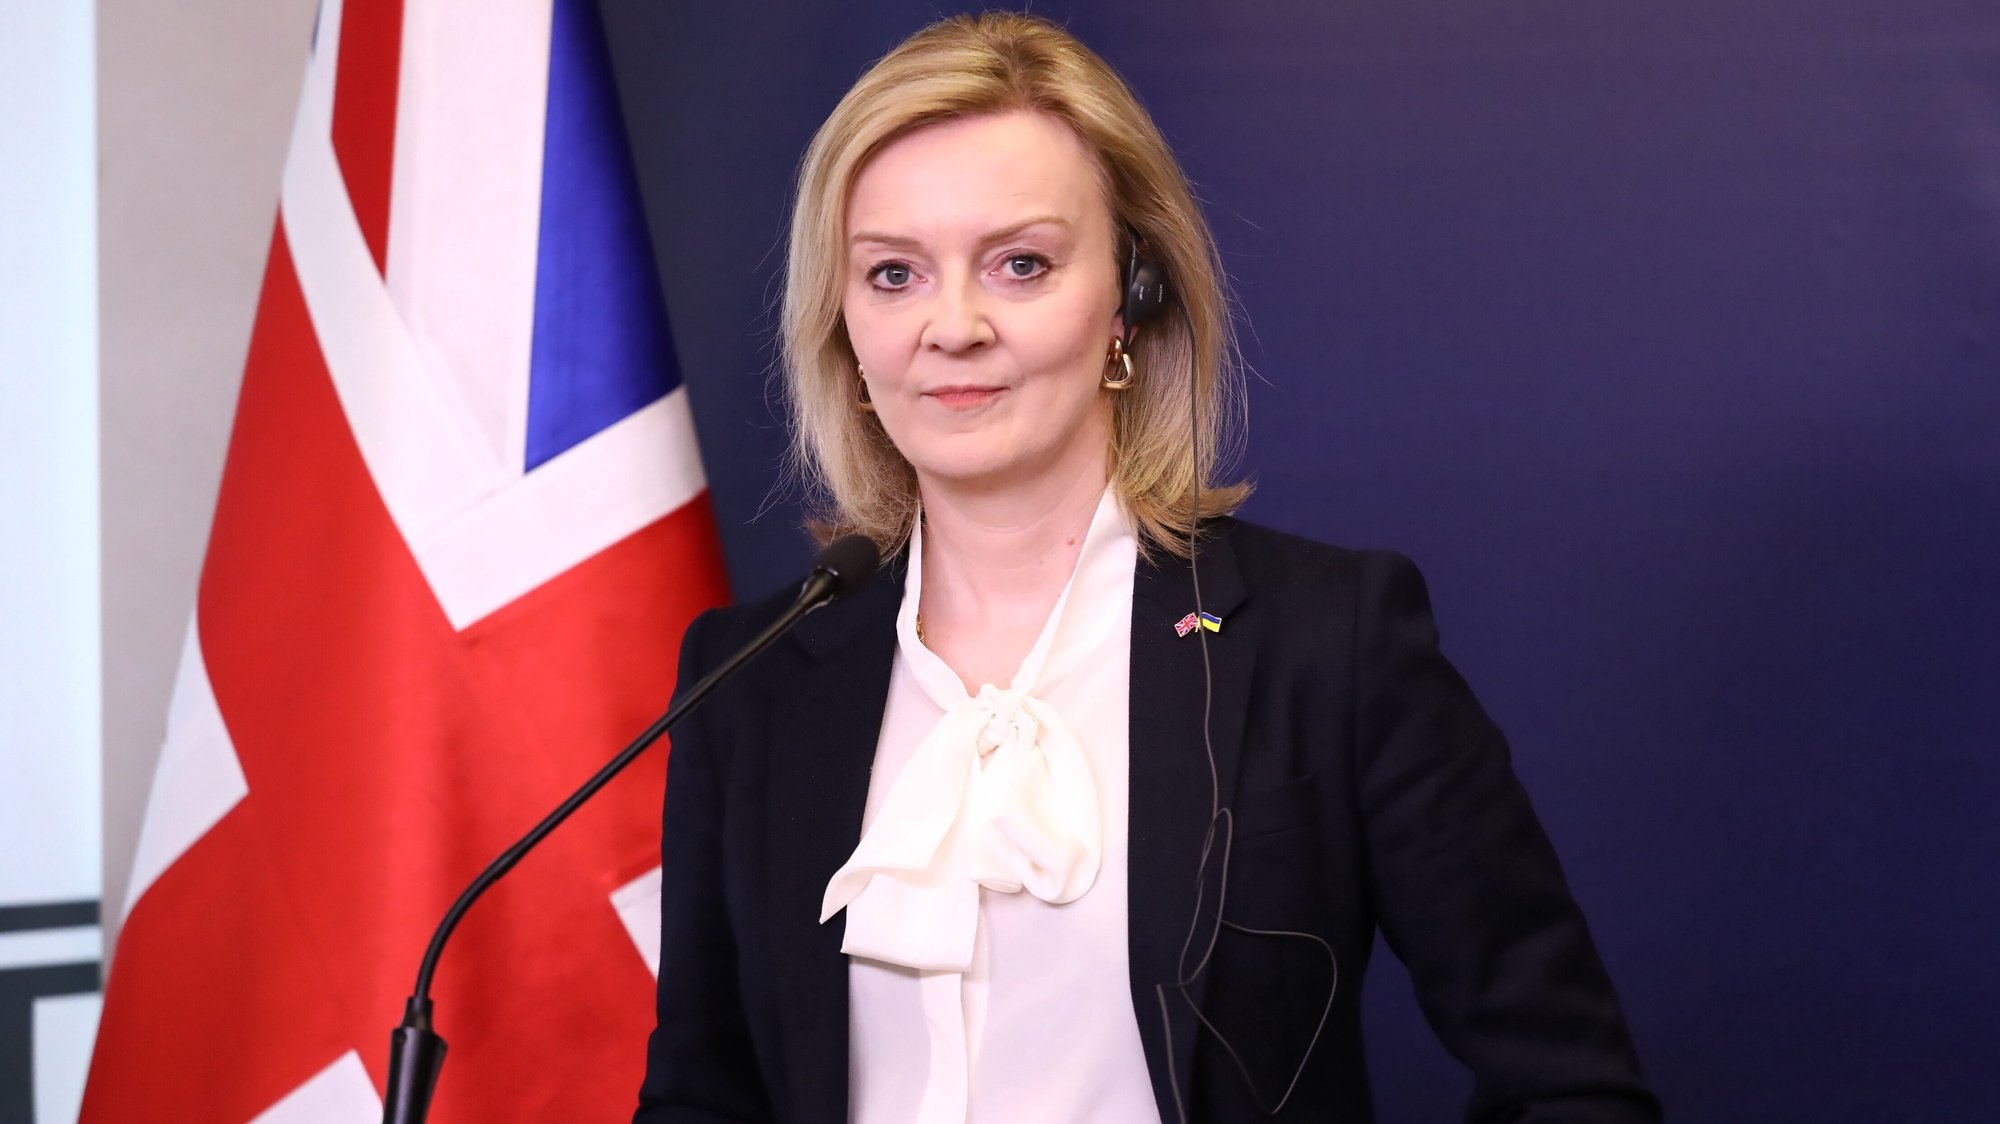 epa09872561 British Foreign Secretary Liz Truss and Polish Foreign Minister Zbigniew Rau (not pictured) during a press conference after their meeting at the headquarters of the Polish Foreign Ministry in Warsaw, Poland, 05 April 2022.  EPA/Tomasz Gzell POLAND OUT